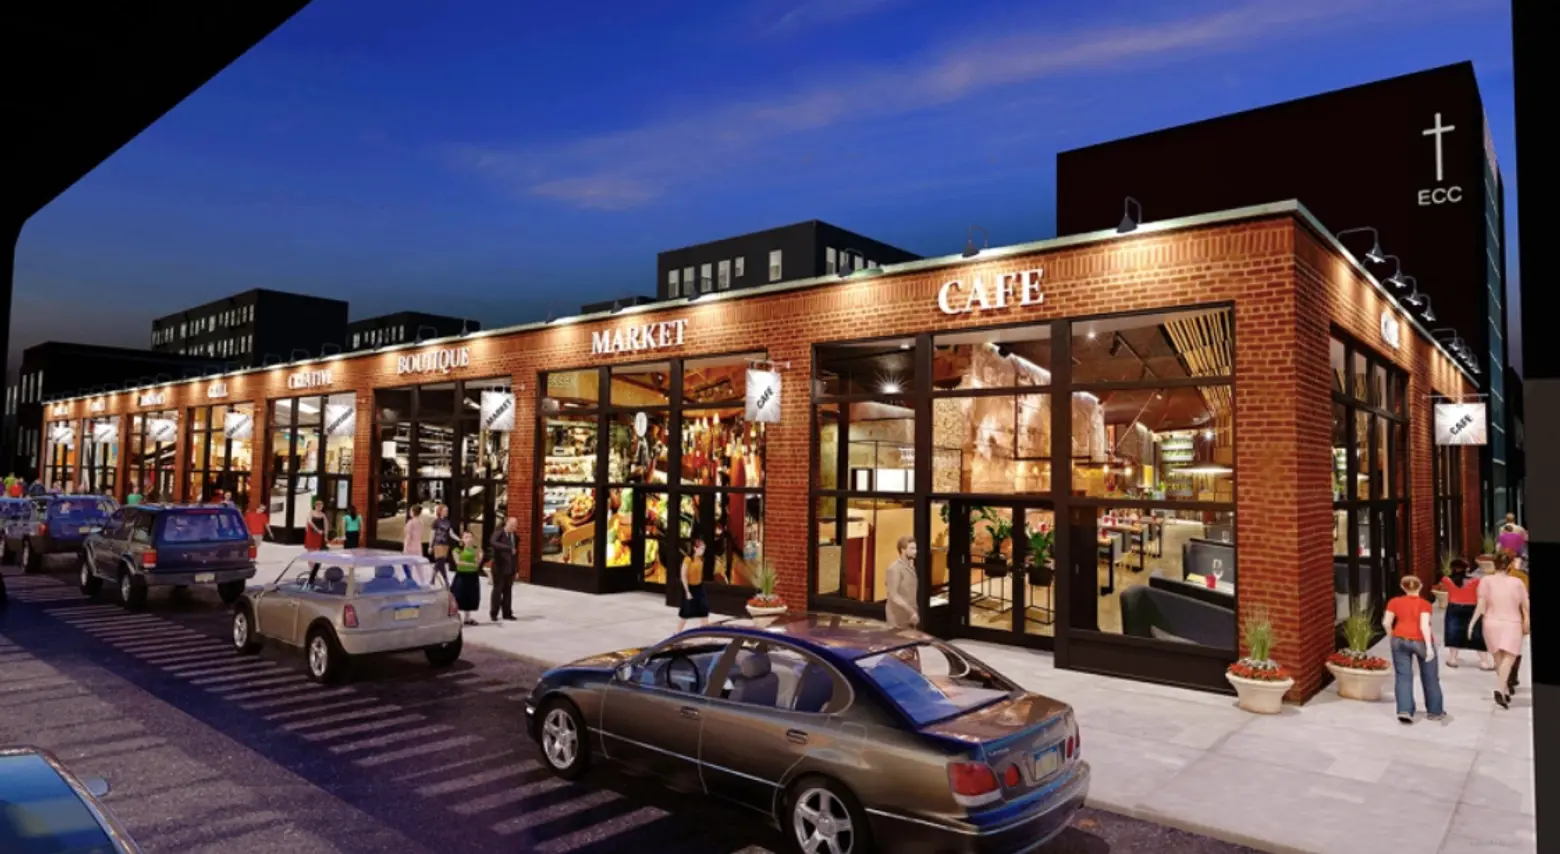 Astoria is getting a new food hall with outer-borough vendors